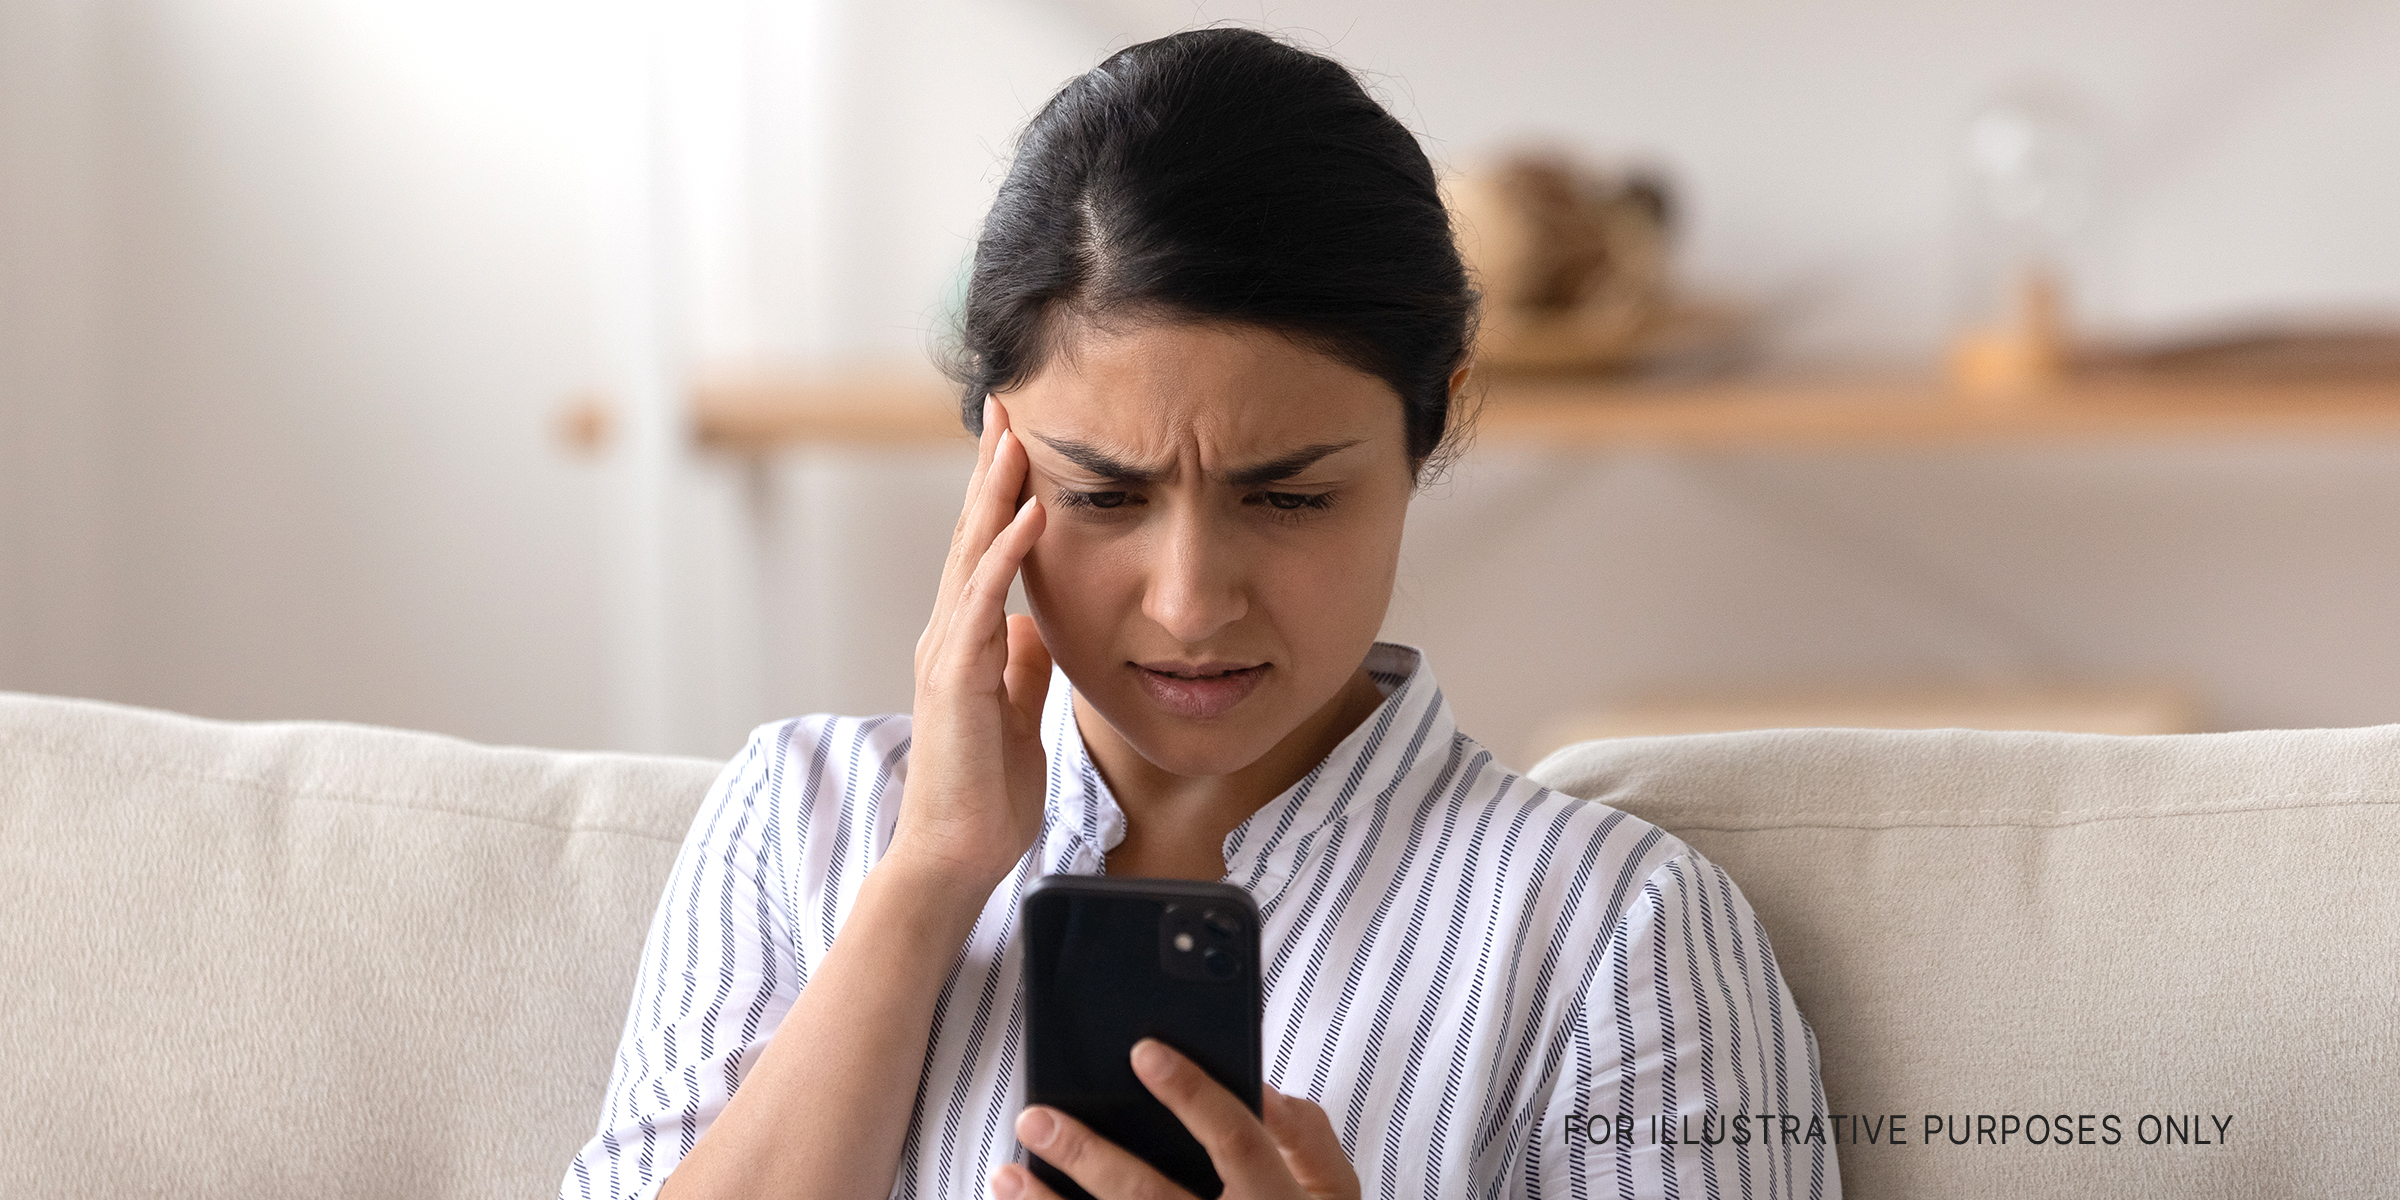 Woman looking at her cellphone with a worried expression on her face | Source: Shutterstock